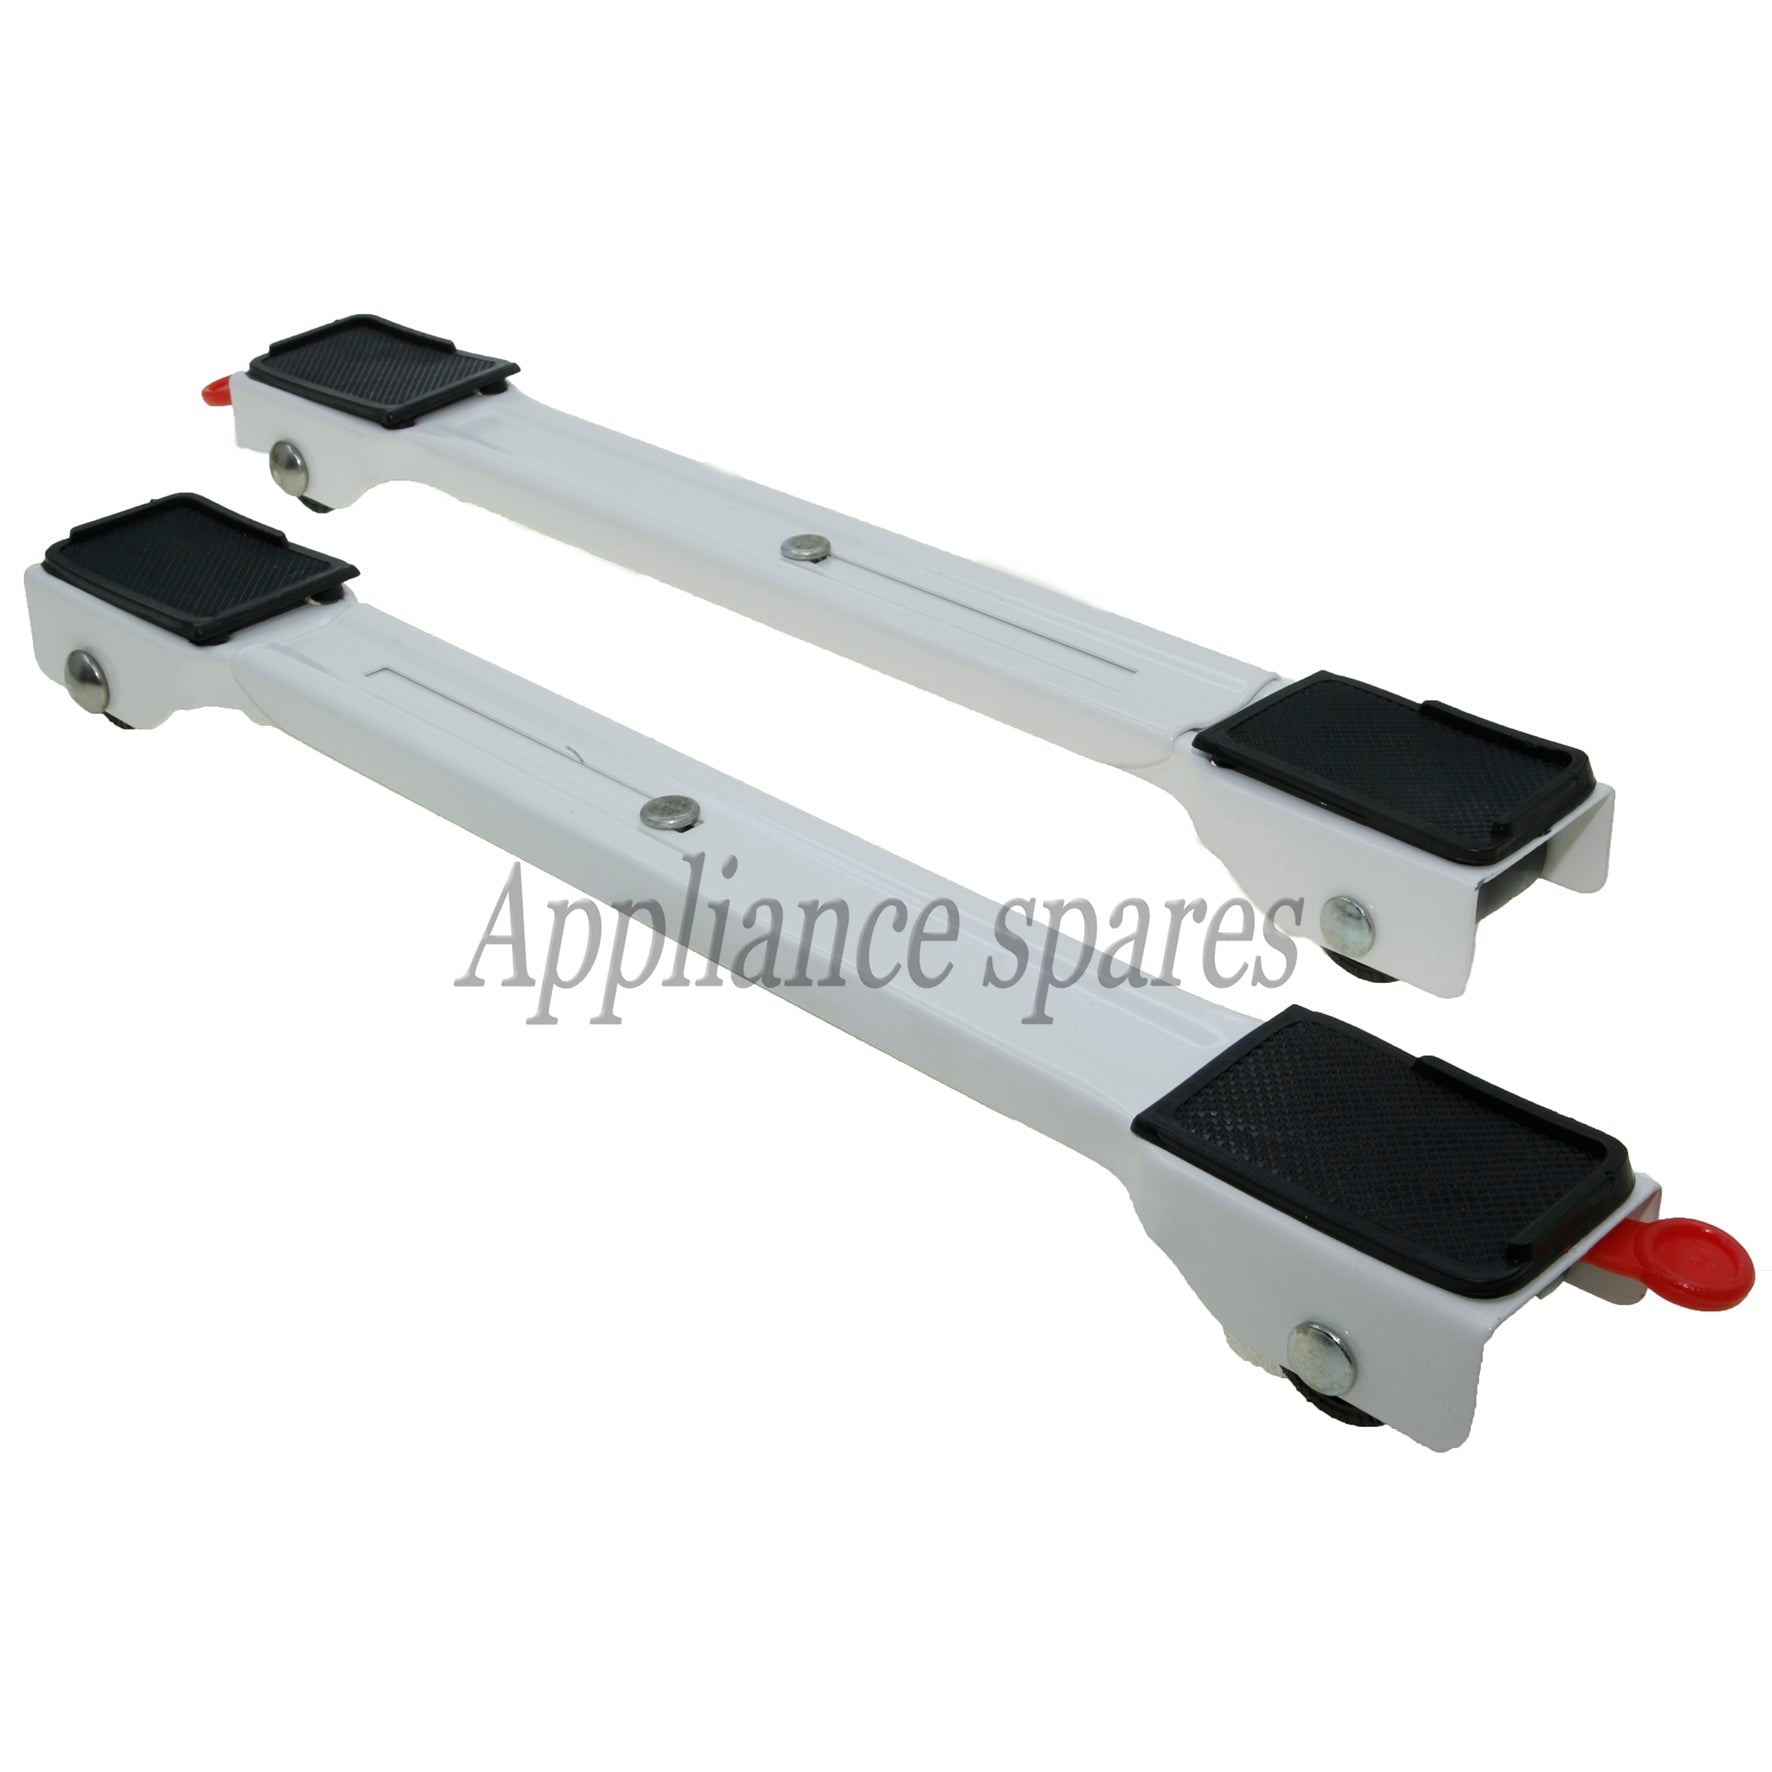 Magic Movers (Appliance Rollers)